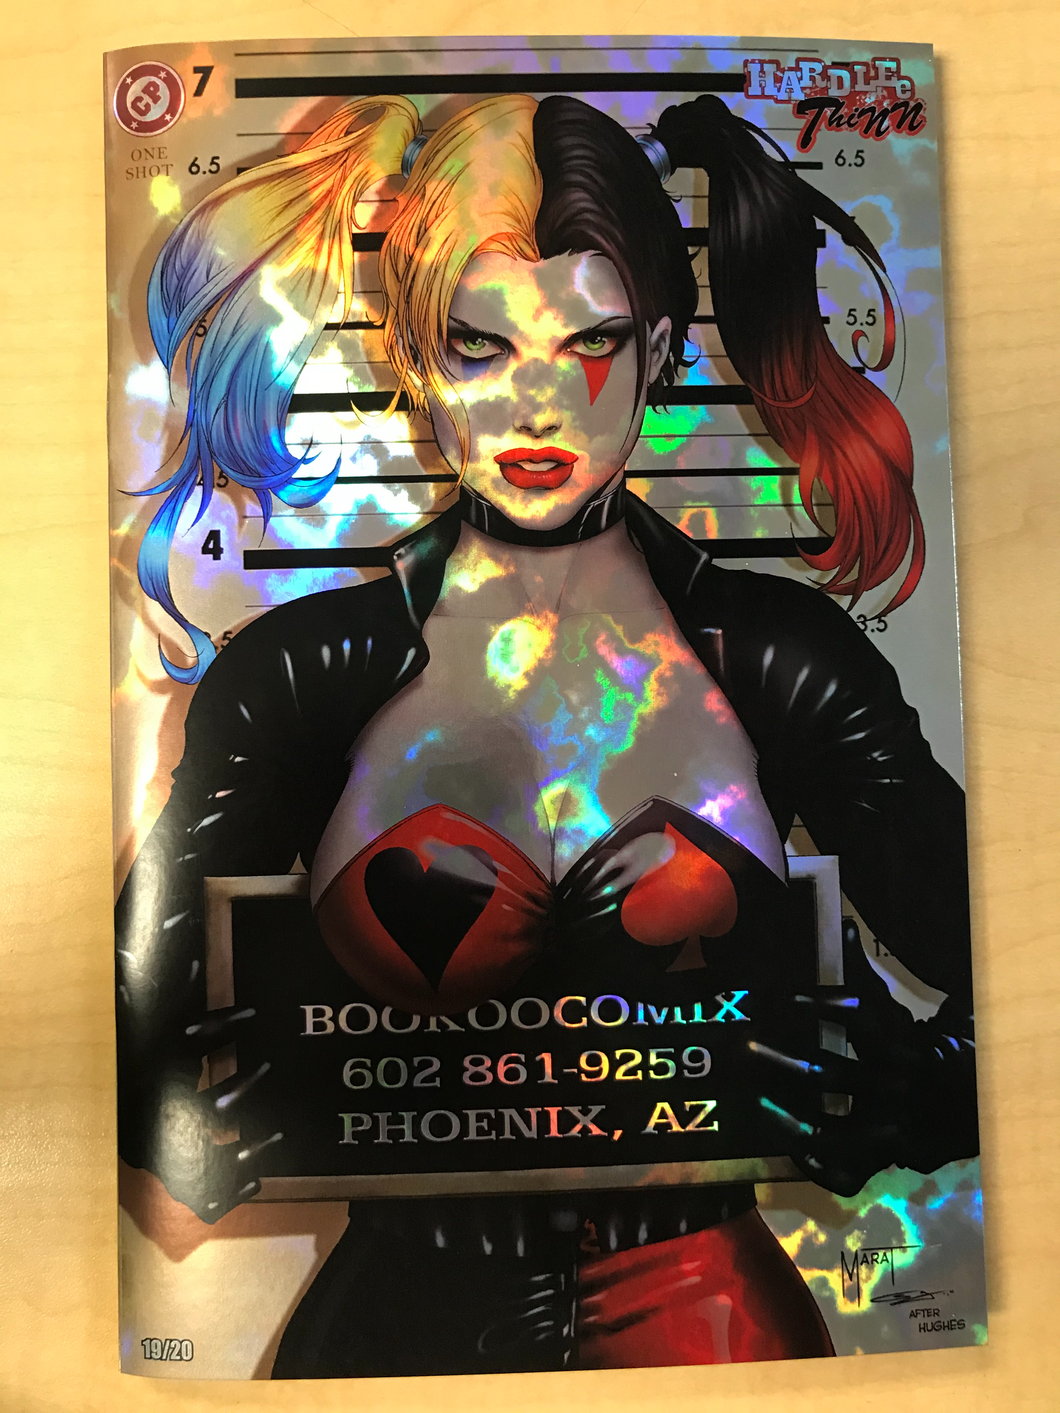 Hardlee Thinn #1 Catwoman #51 Adam Hughes Homage MAGMA HOLO FOIL Variant Cover by Marat Mychaels BooKooComix 20th Anniversary Exclusive Edition Limited to 20 Serial Numbered Copies!!!